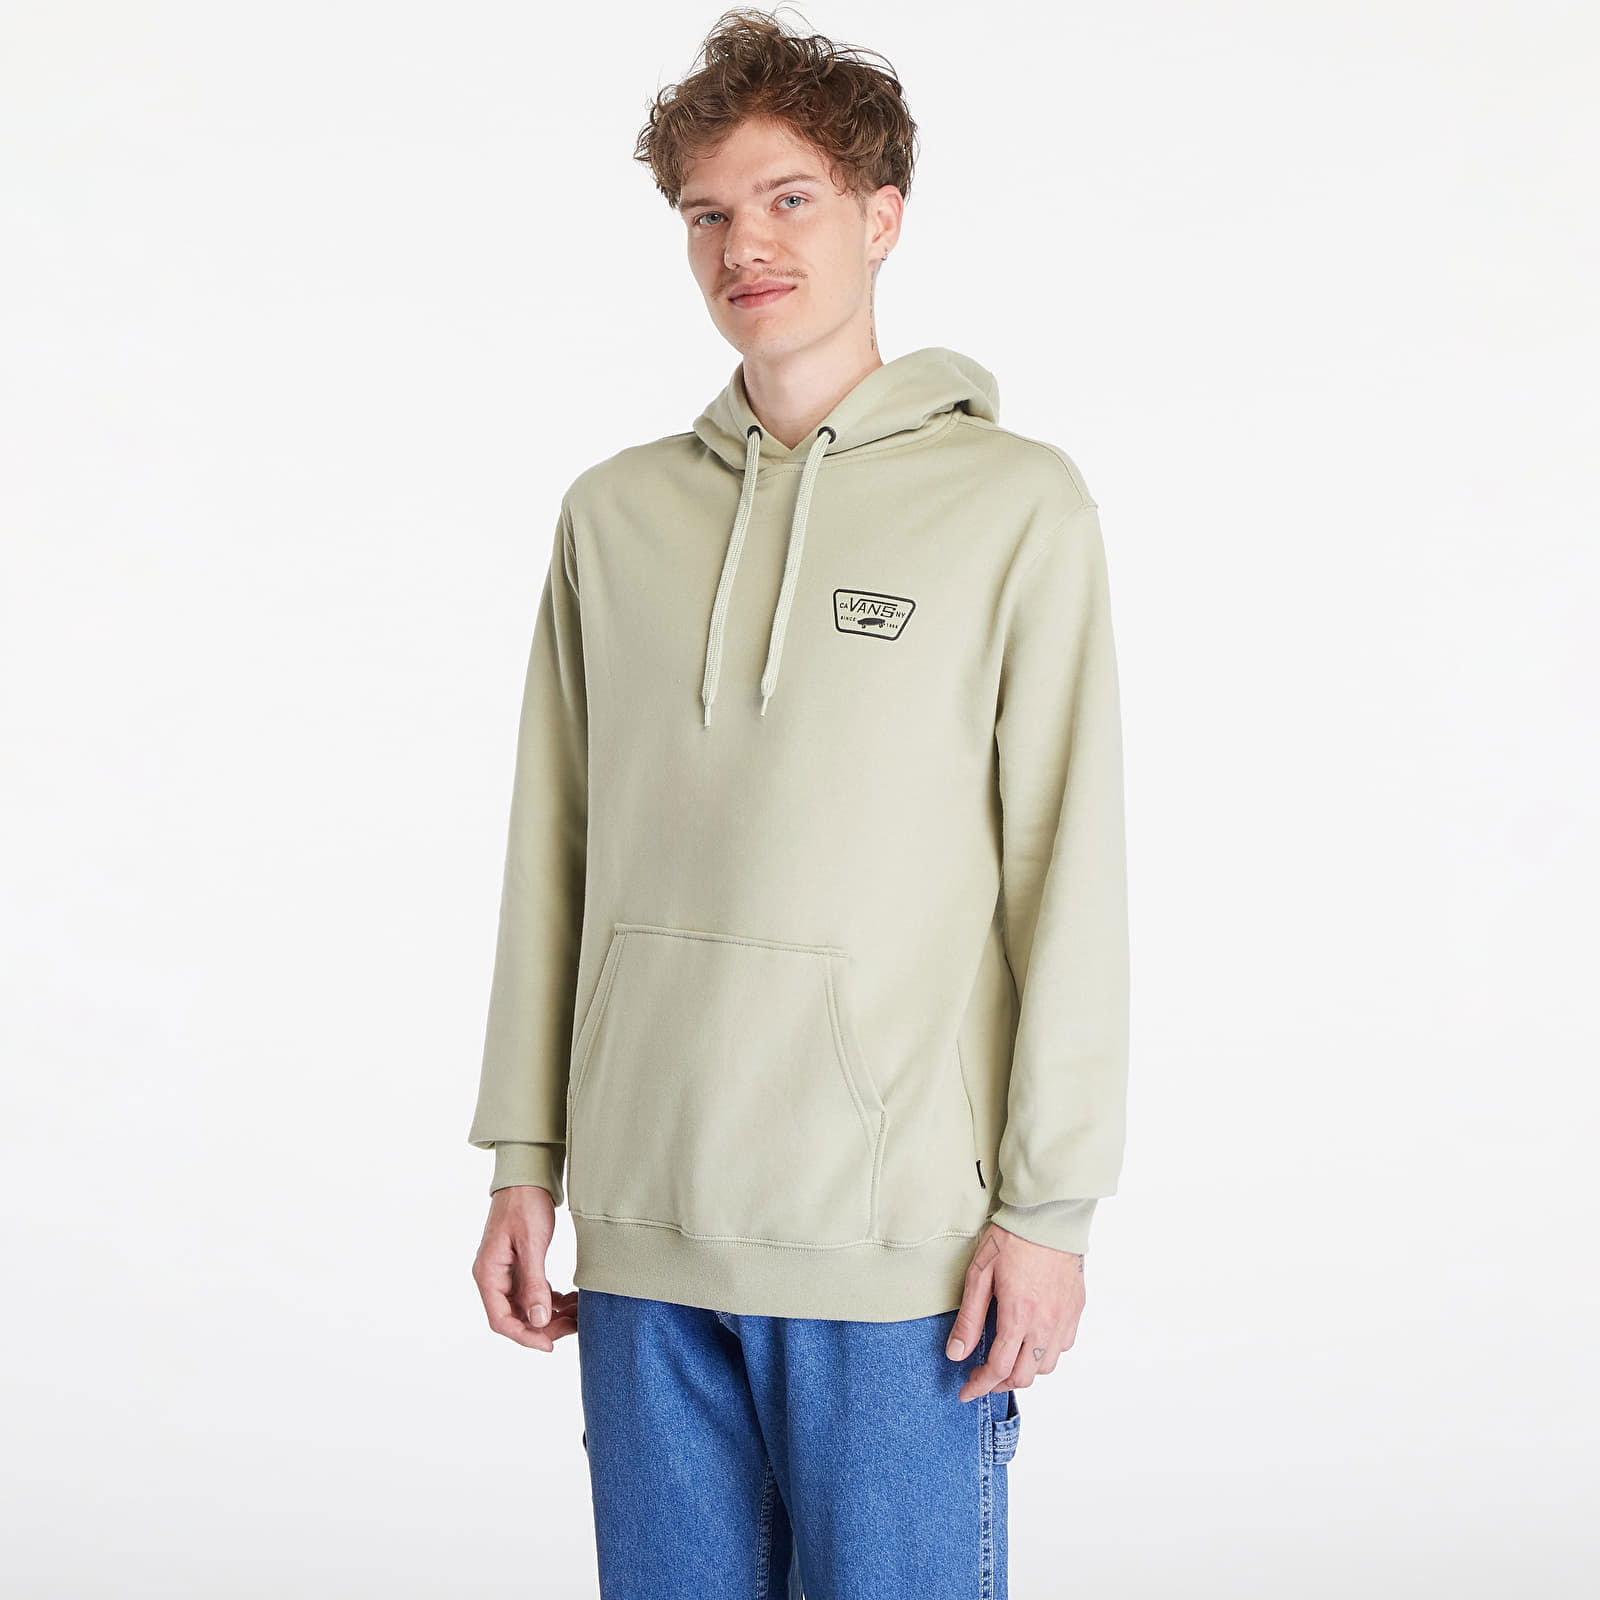 Full Patch Pullover Elm